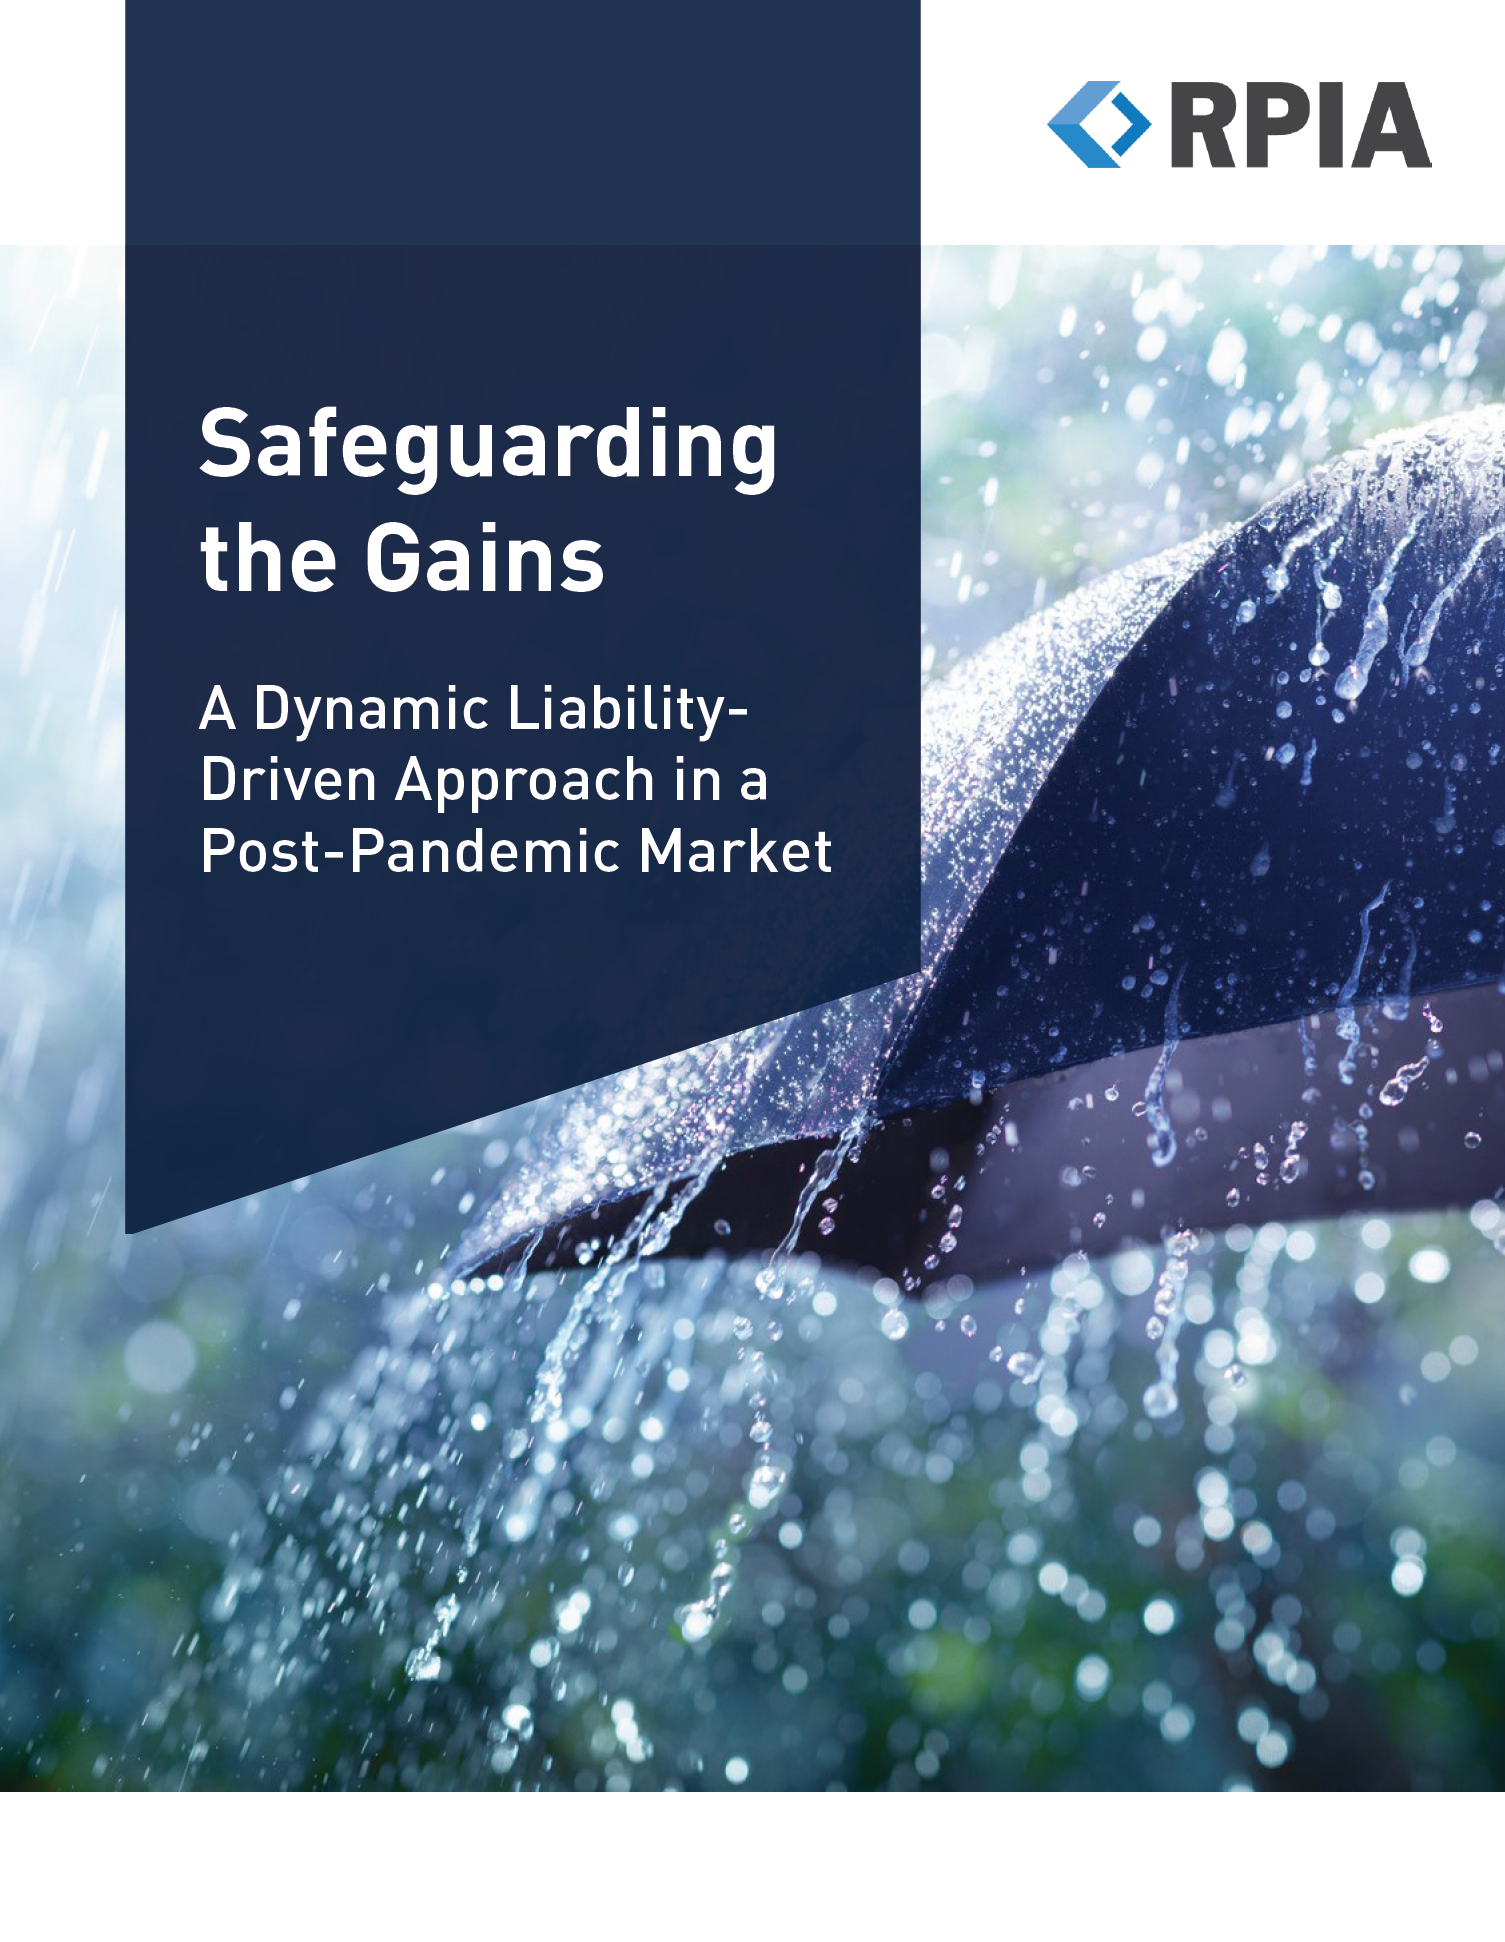 Safeguarding the gains paper cover